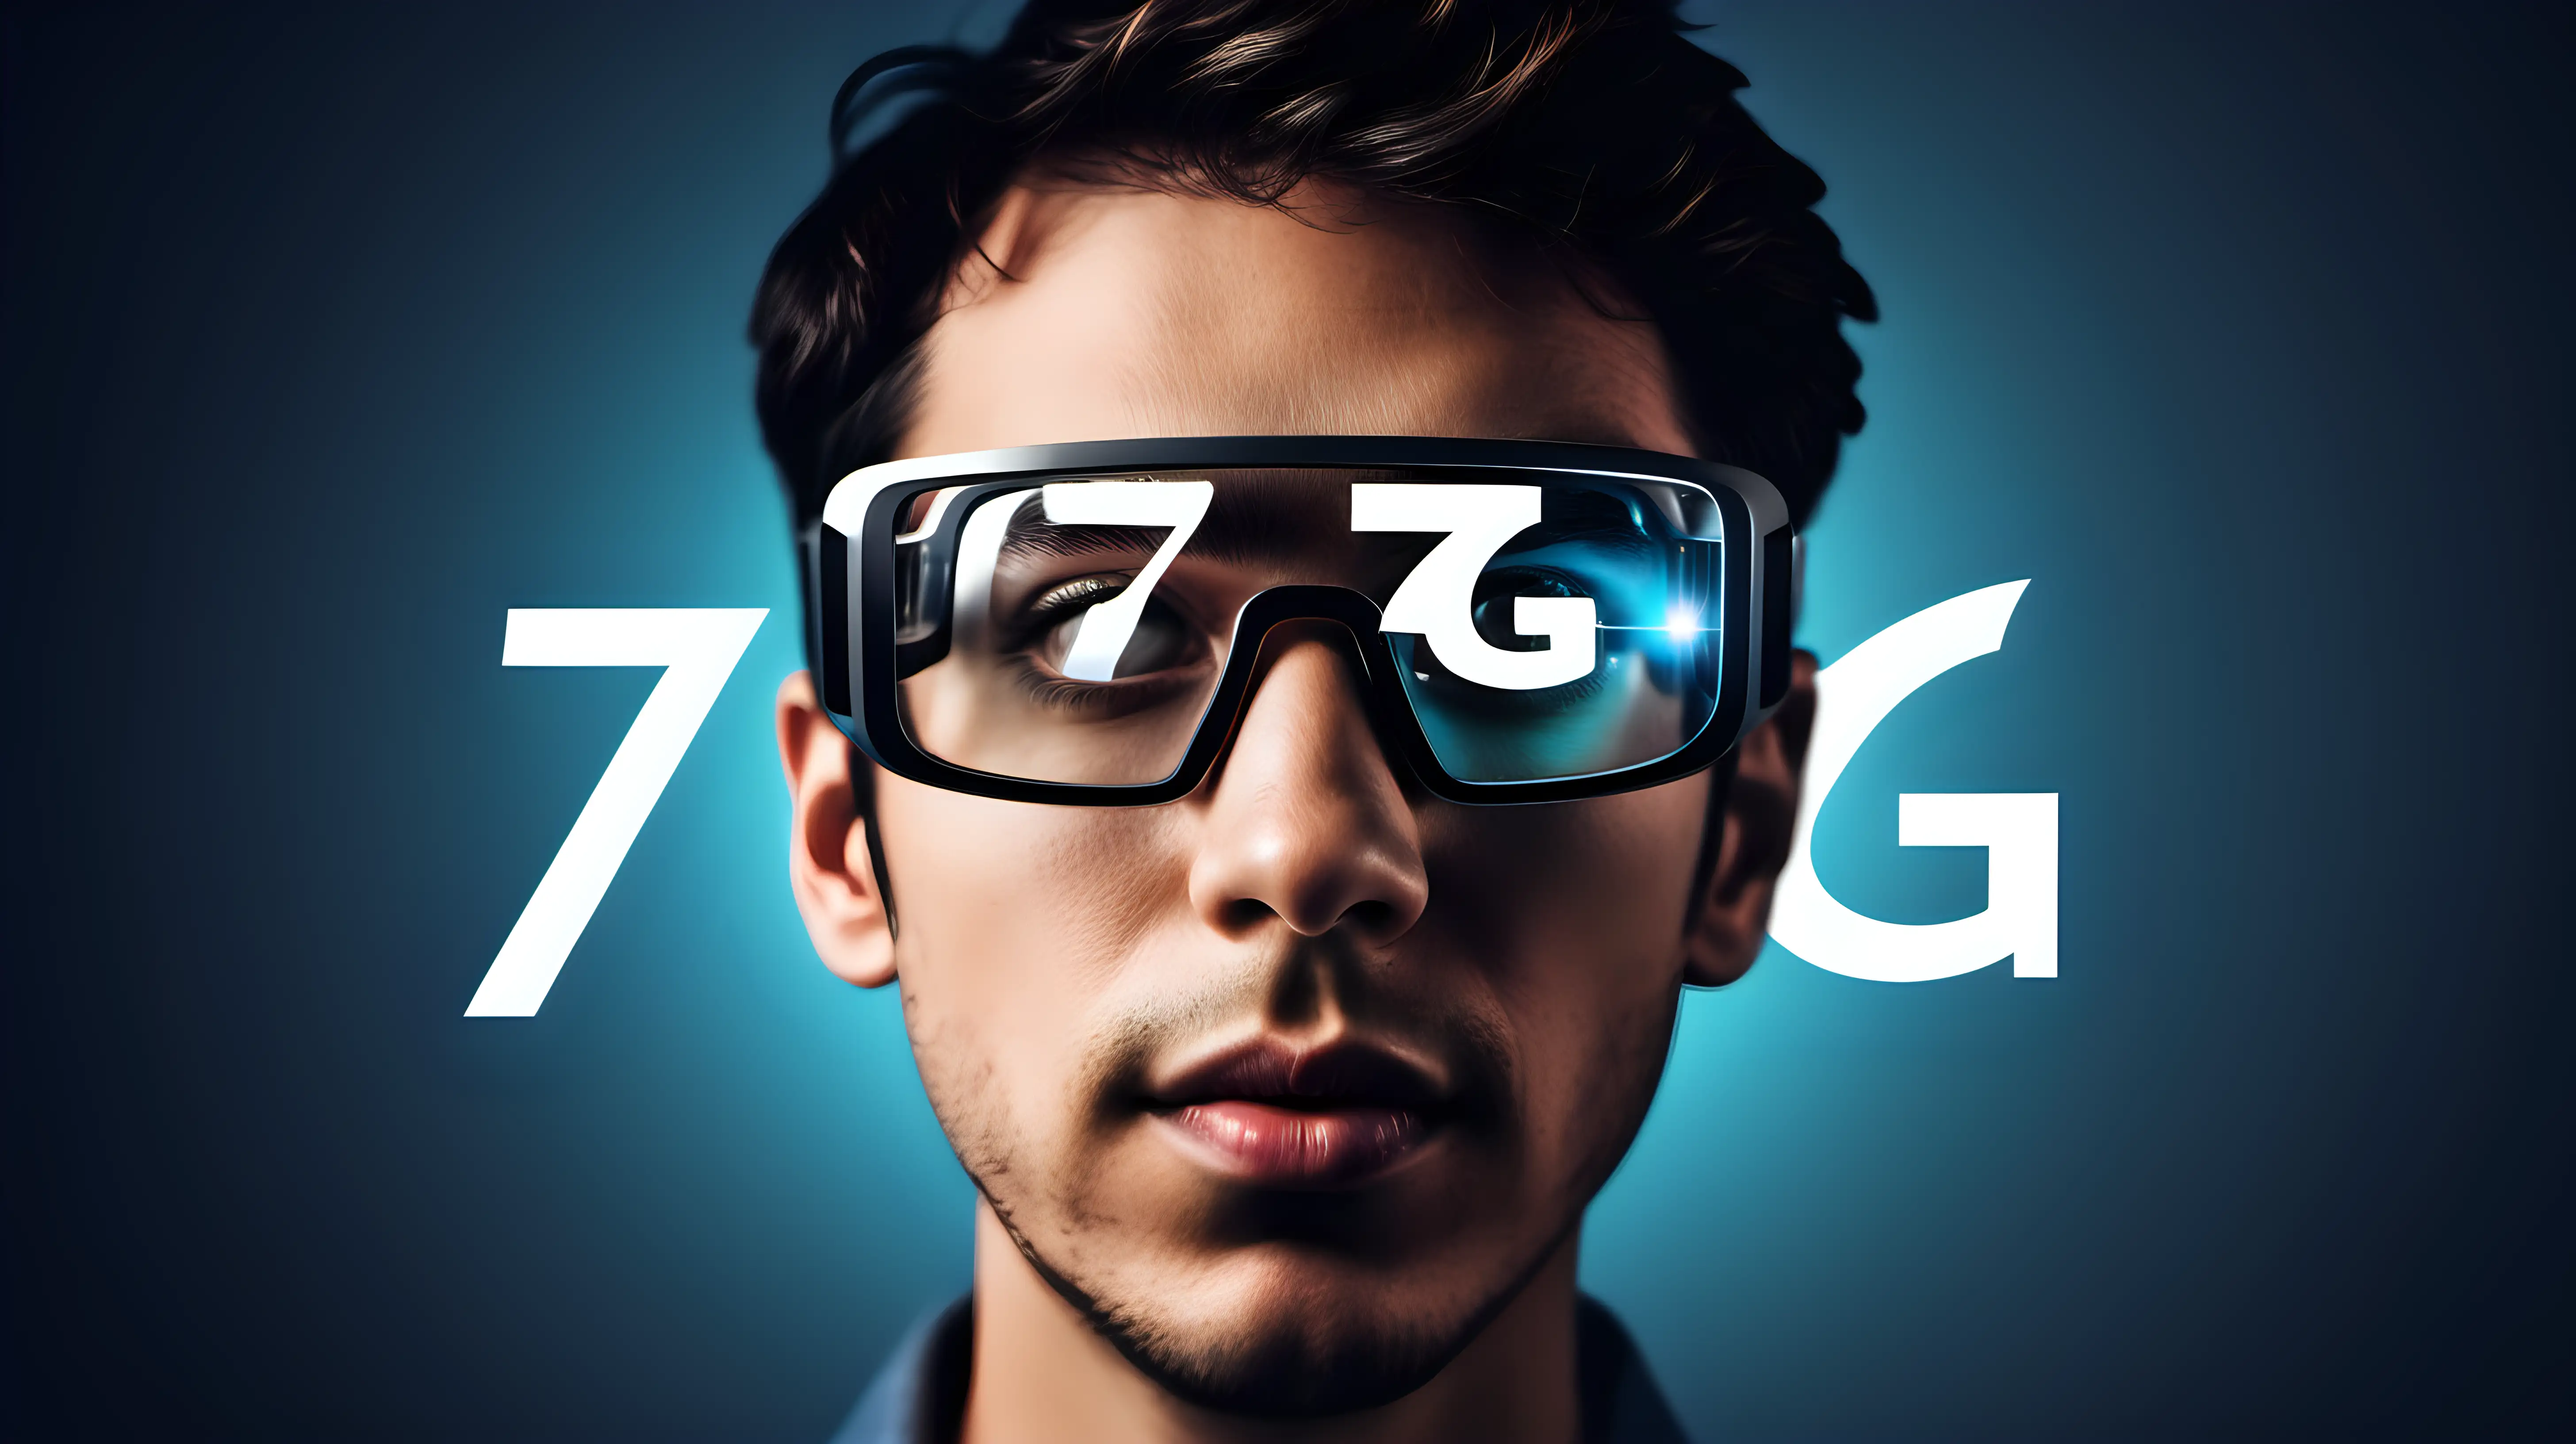 Illustrate an image of a person wearing augmented reality glasses with the reflection of the "7G" logo superimposed, suggesting the immersive experiences facilitated by next-generation connectivity.